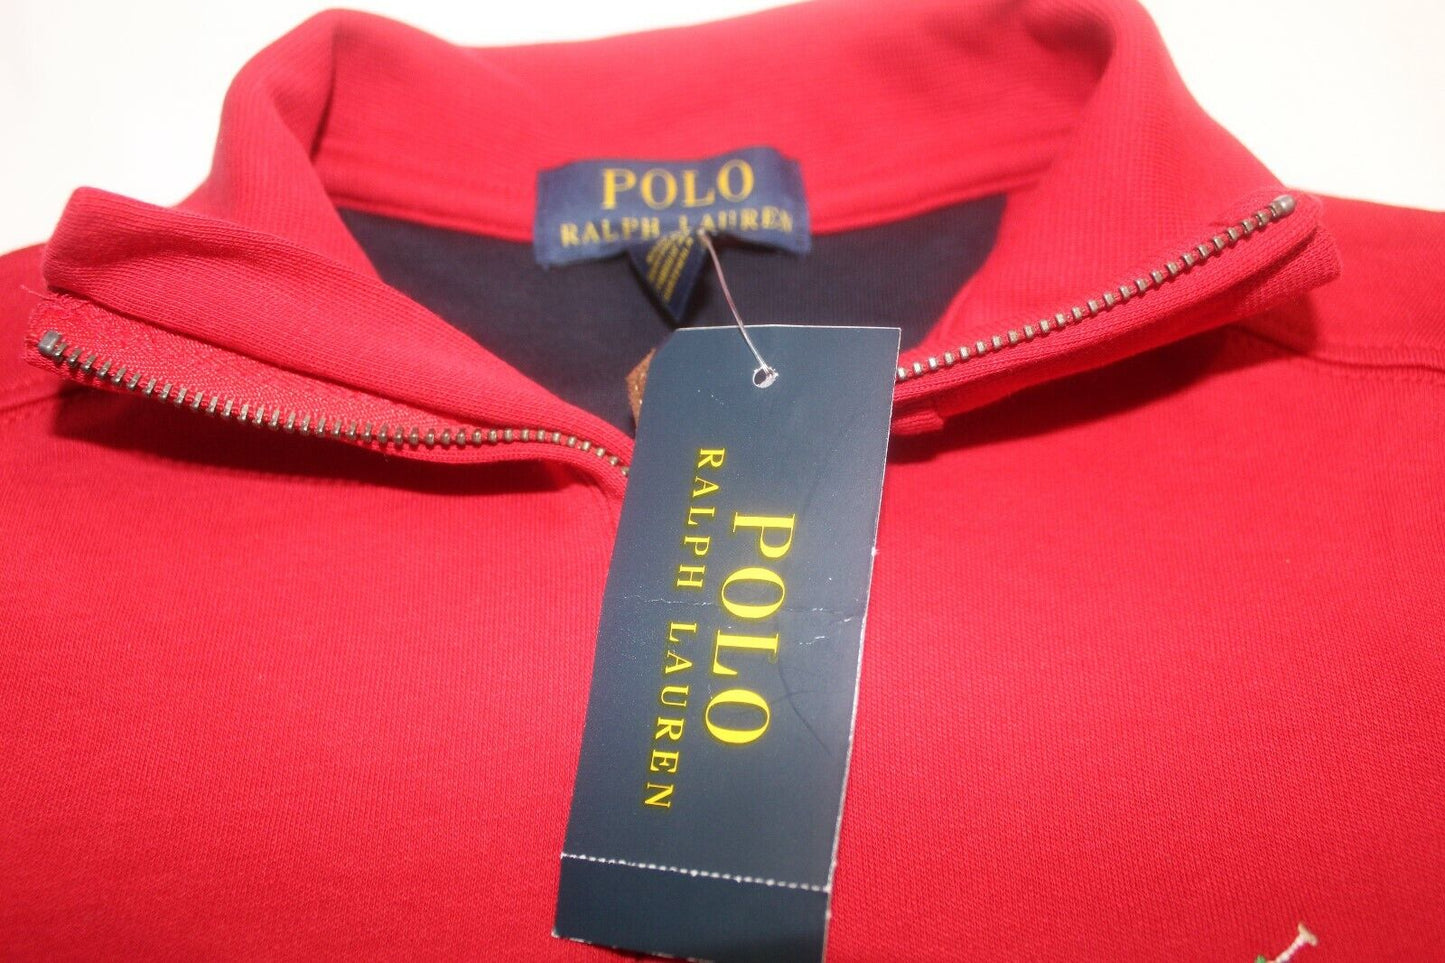 *NWT* $50 Polo Ralph Lauren Youth 1/4 Zip Pullover Red LS Jacket Sz Med (10-12)